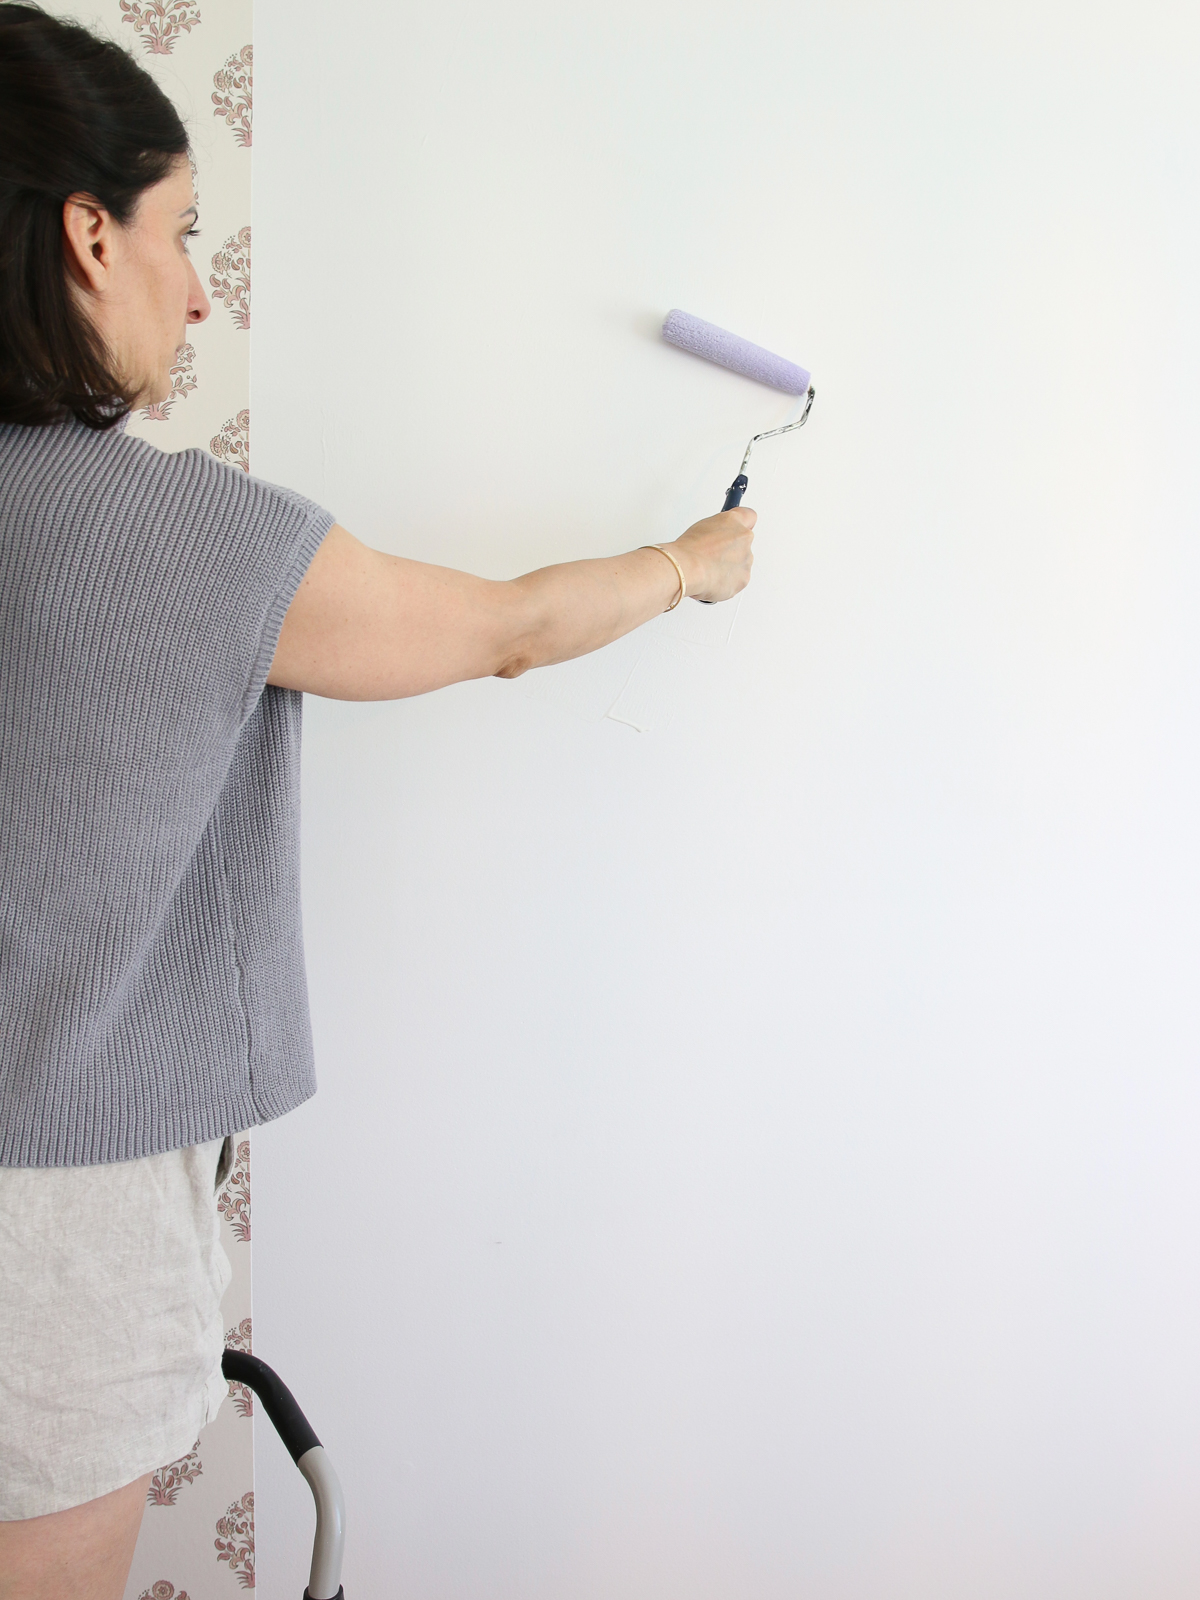 Stefana Silber rolling wallpaper paste with a paint roller on a wall